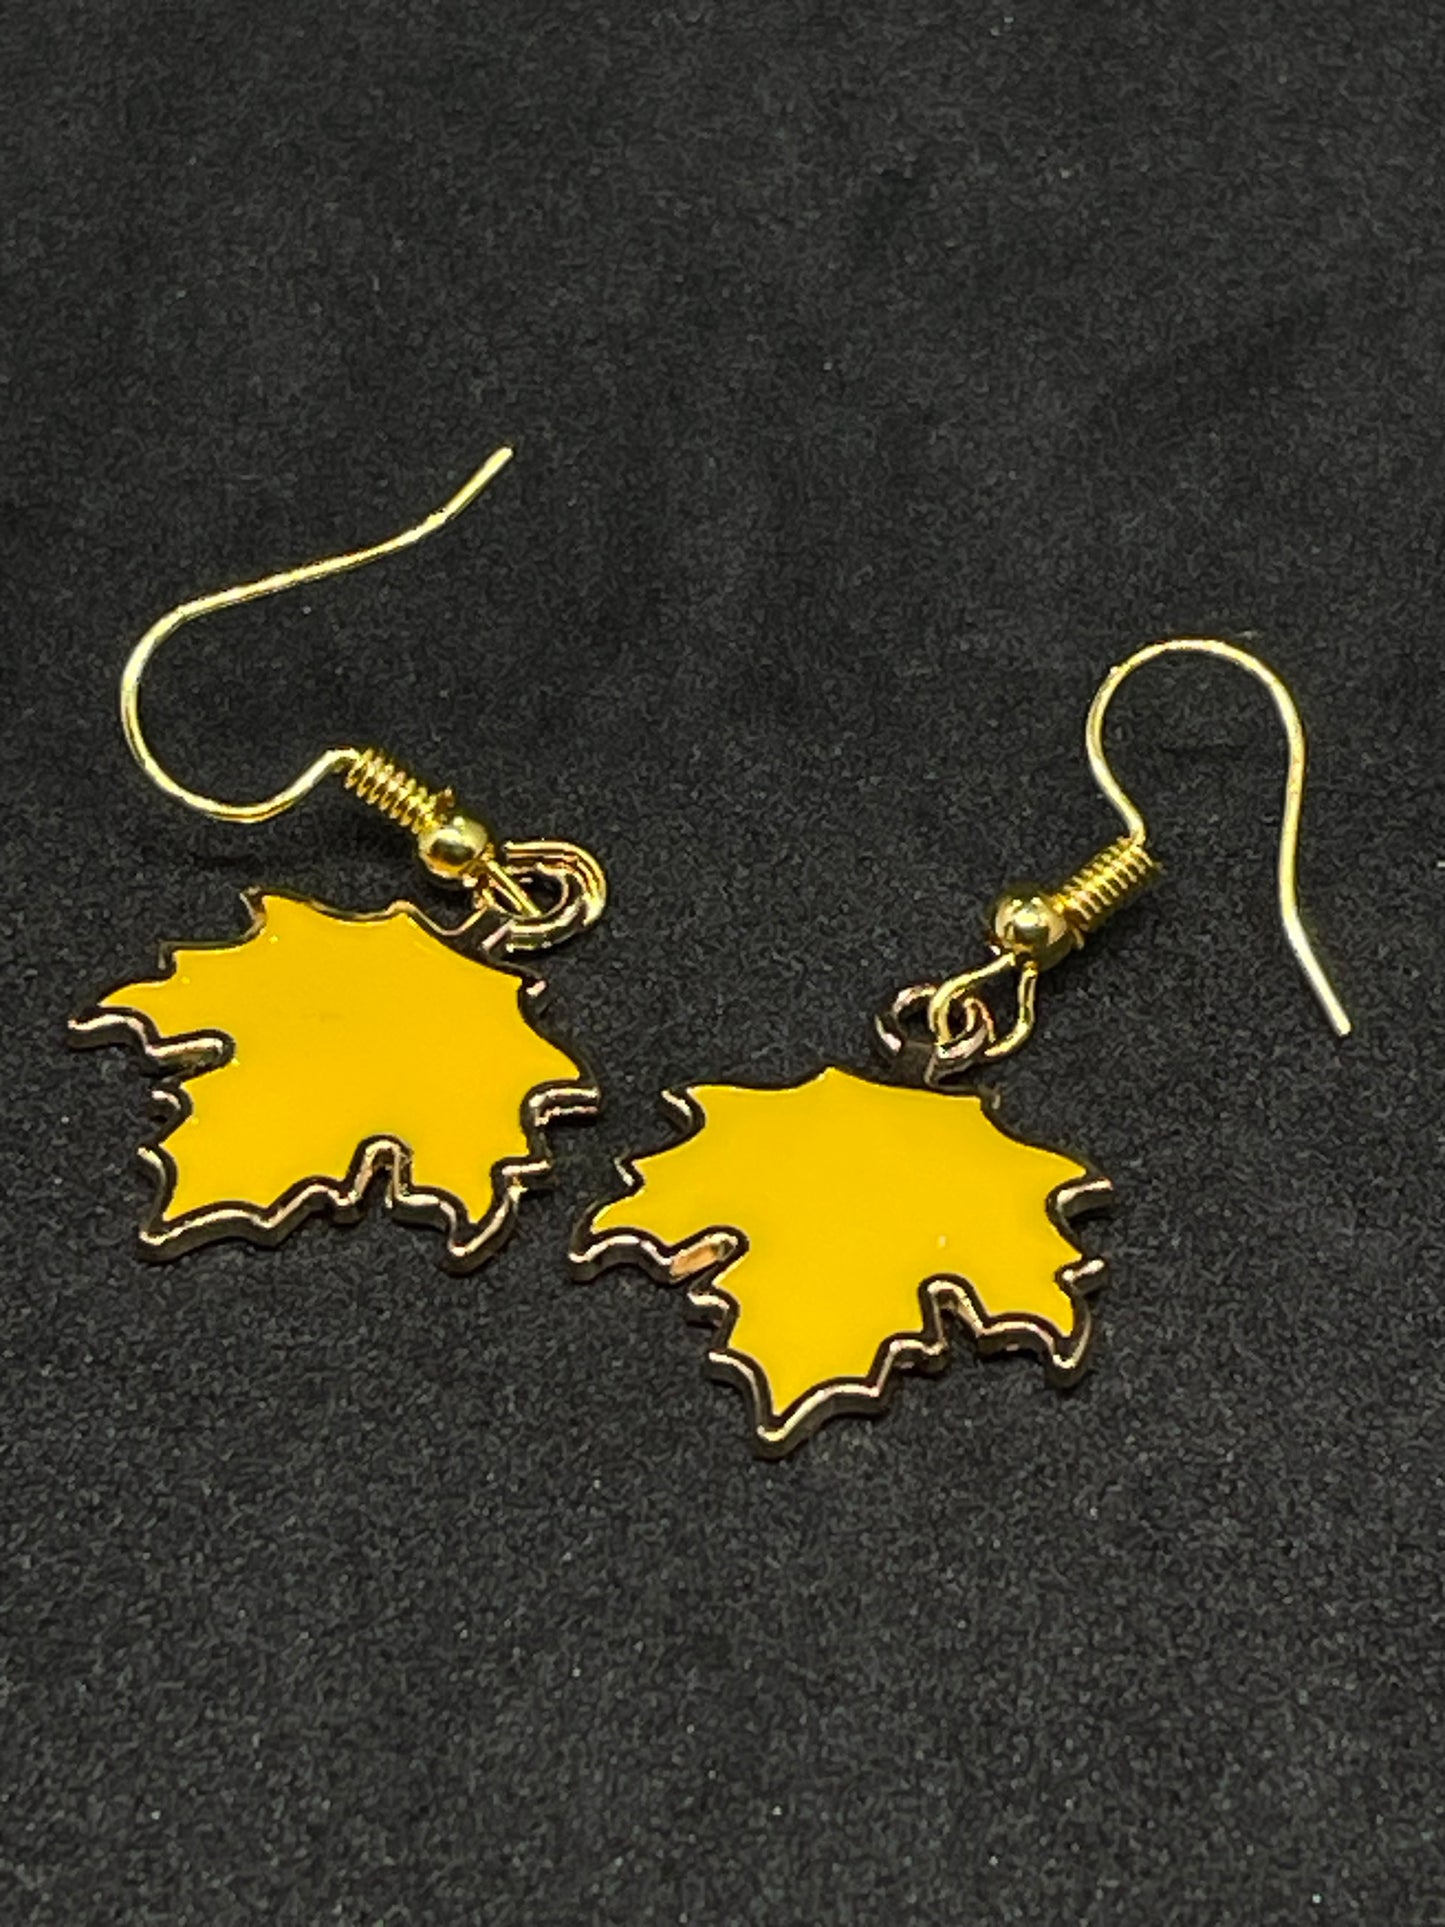 Maple leaf charm drop earrings with gold hooks